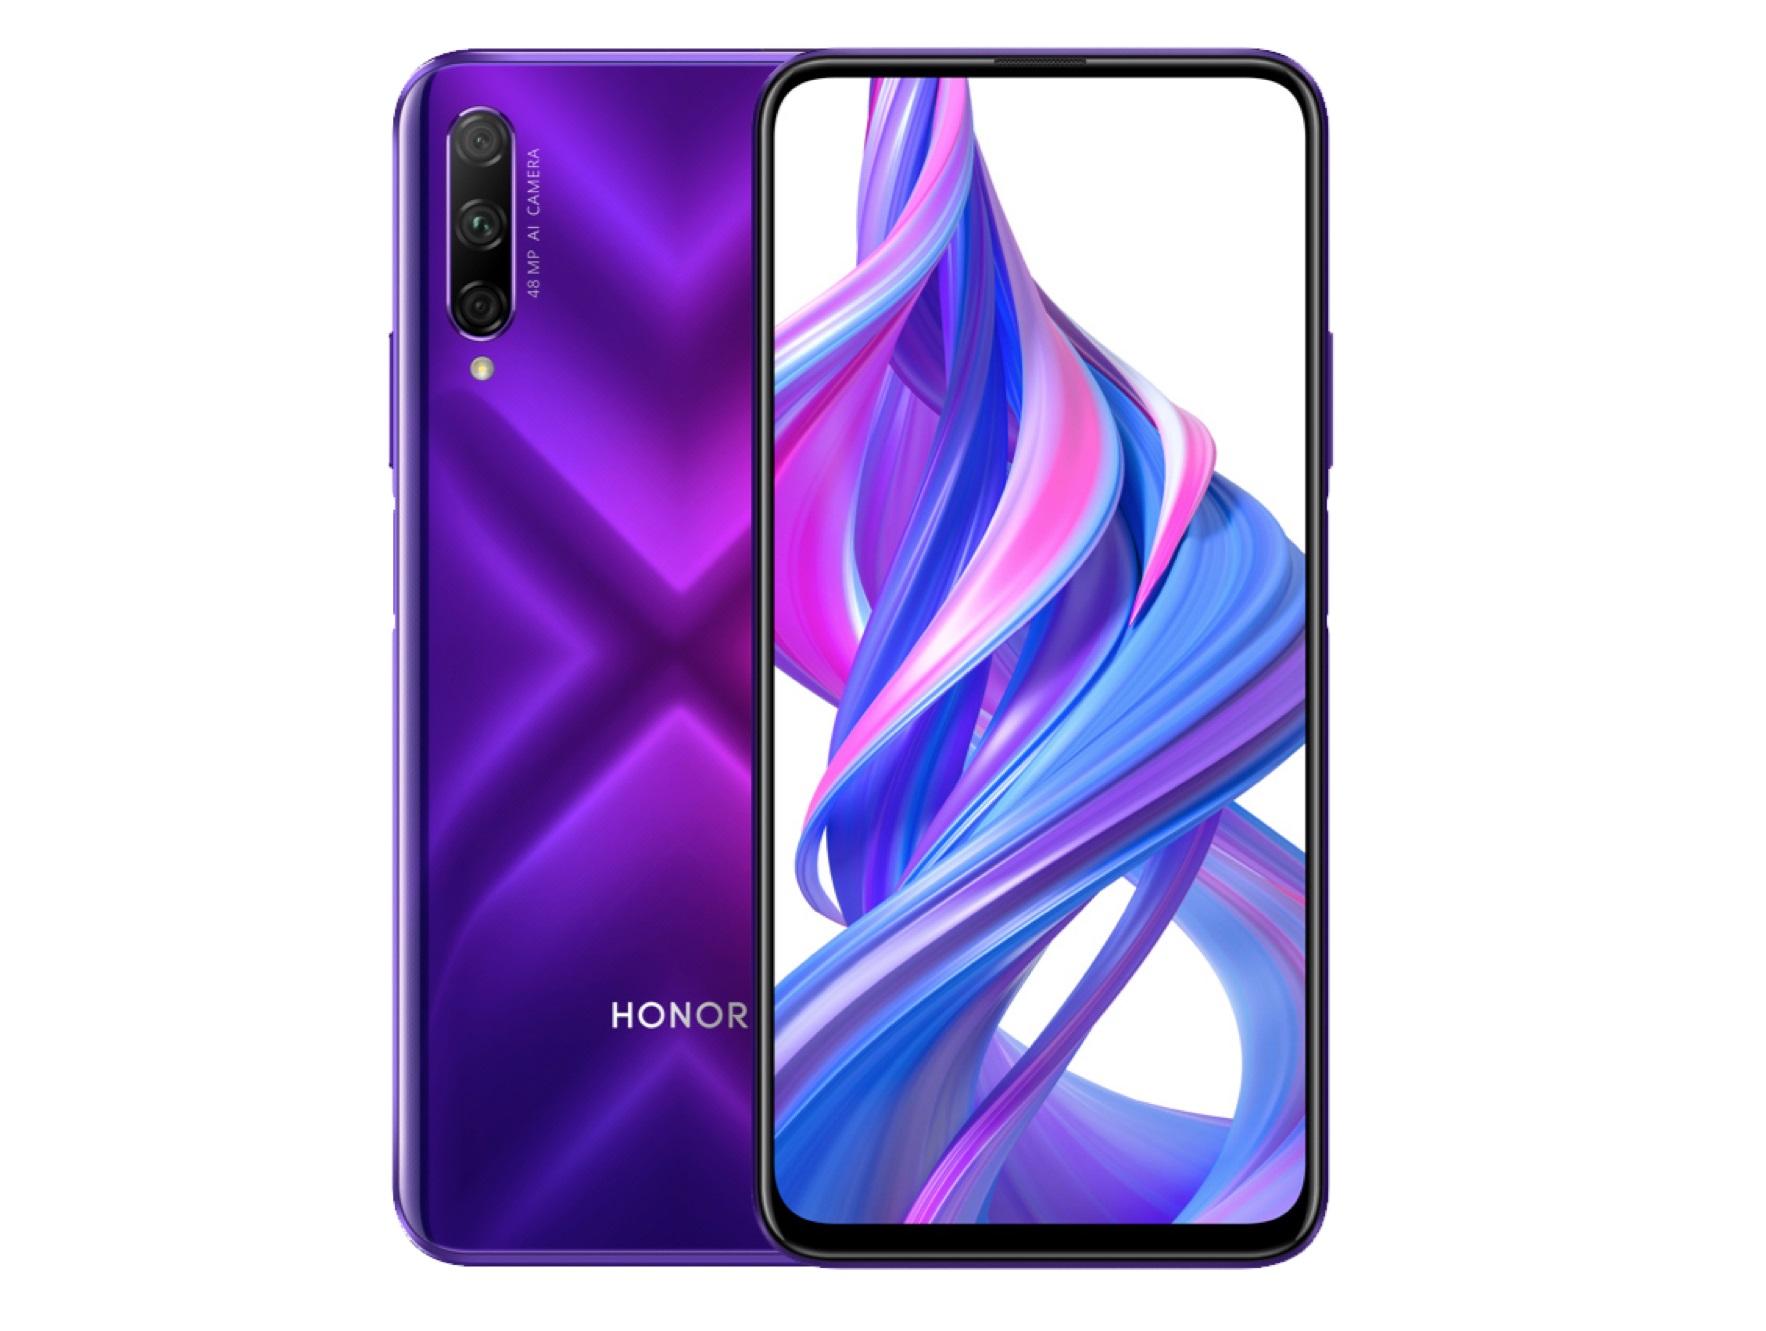 Honor 9X Pro Pricing revealed hours ahead of launch